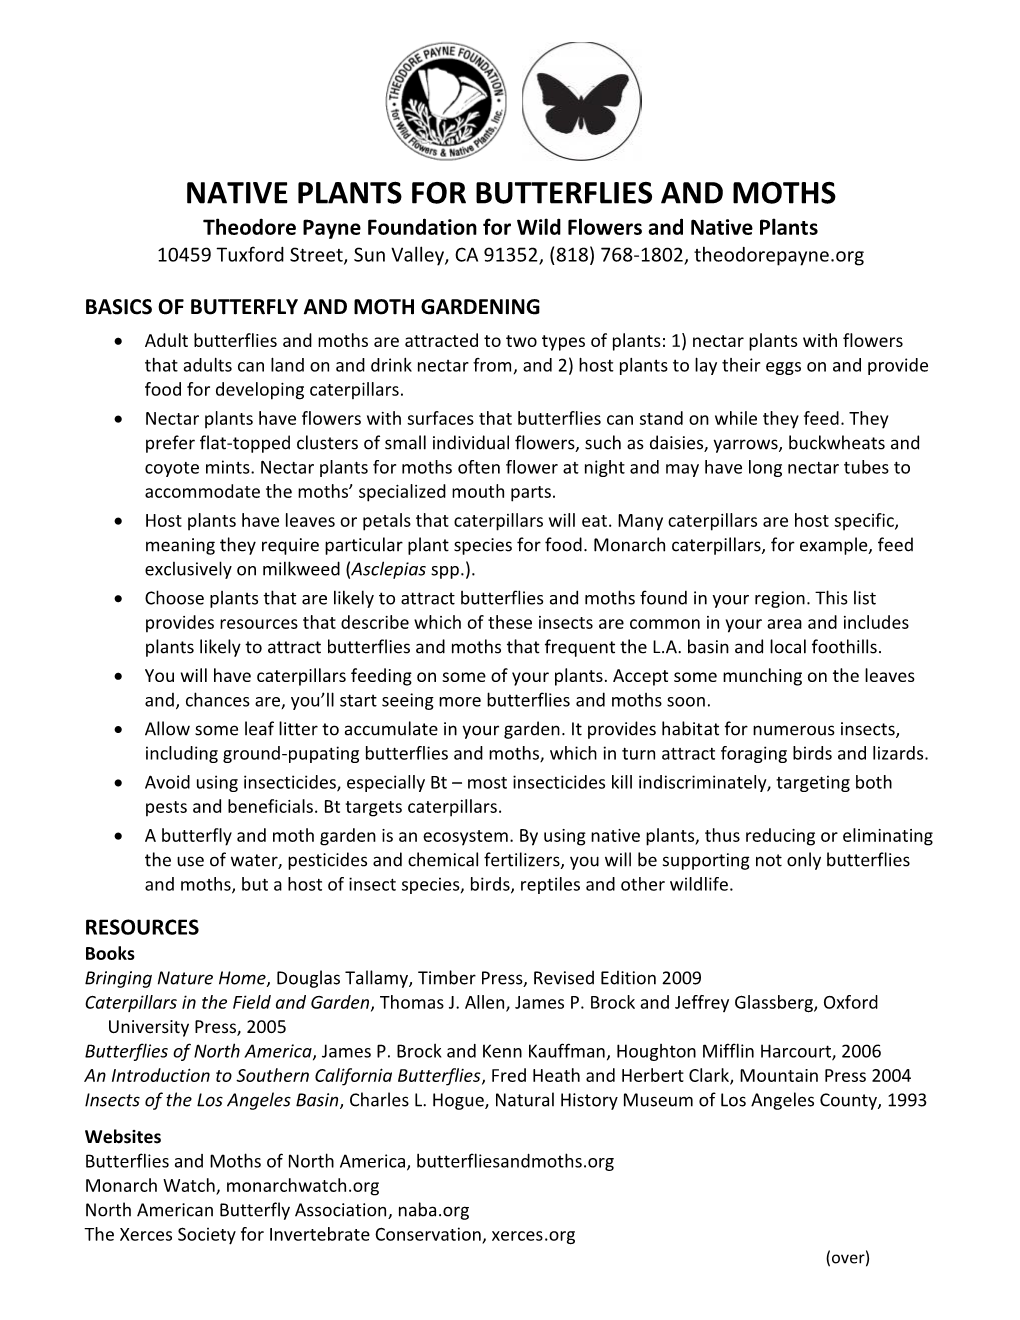 Native Plants for Butterflies and Moths